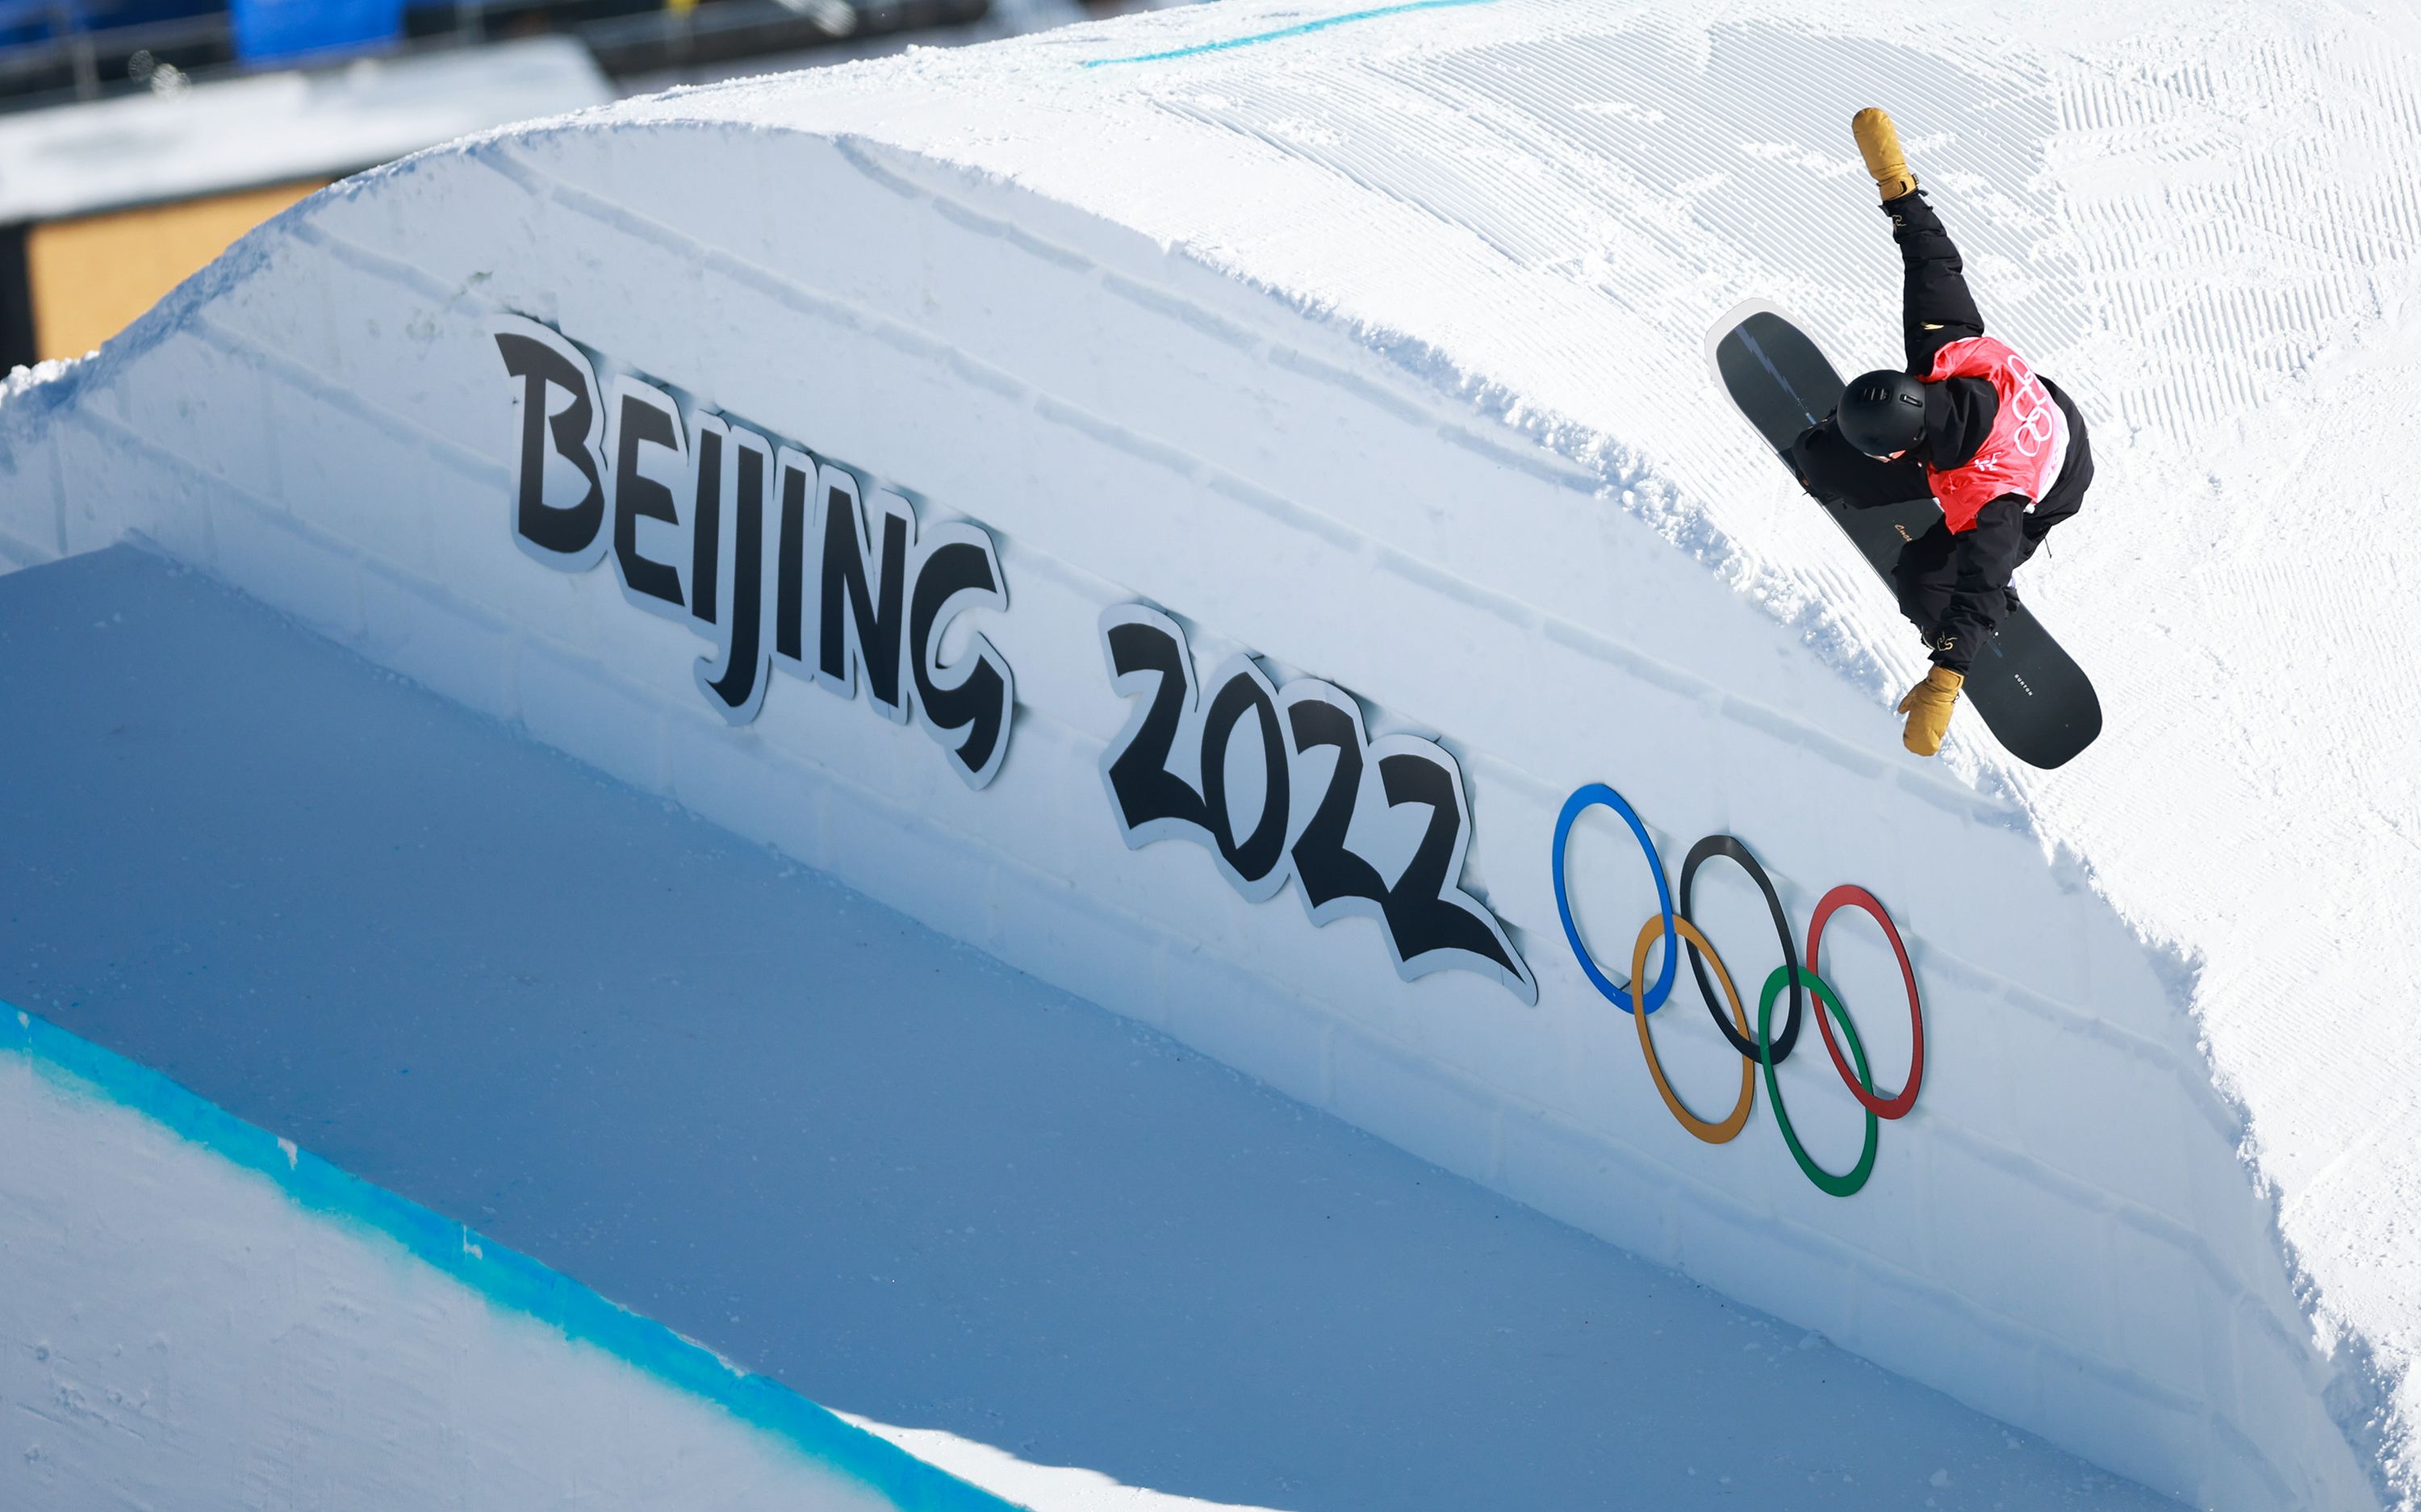 International spectators to be barred from Beijing 2022 Winter Olympics